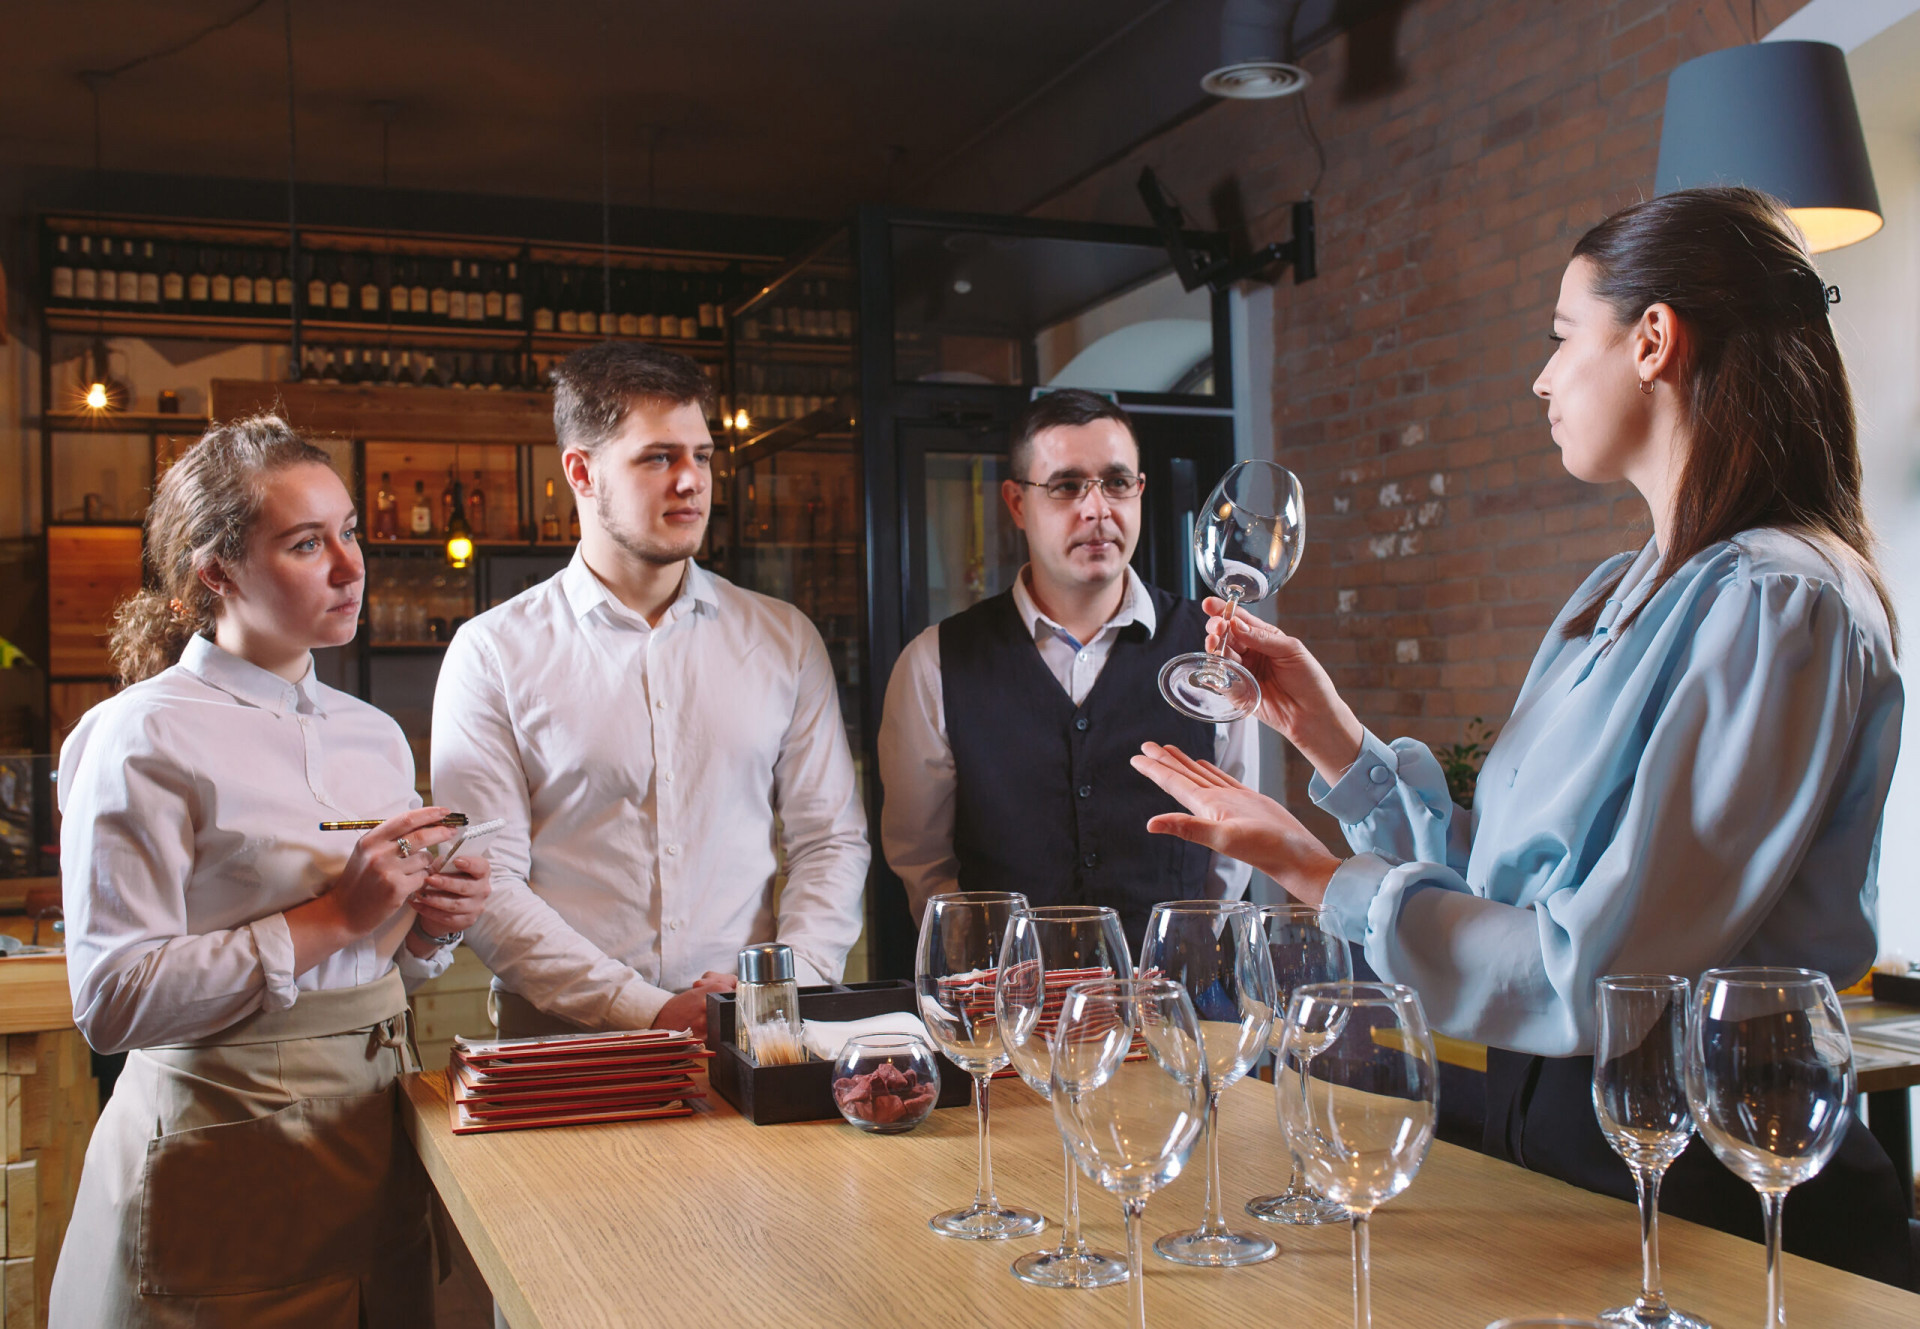 Staff training can help reduce restaurant costs